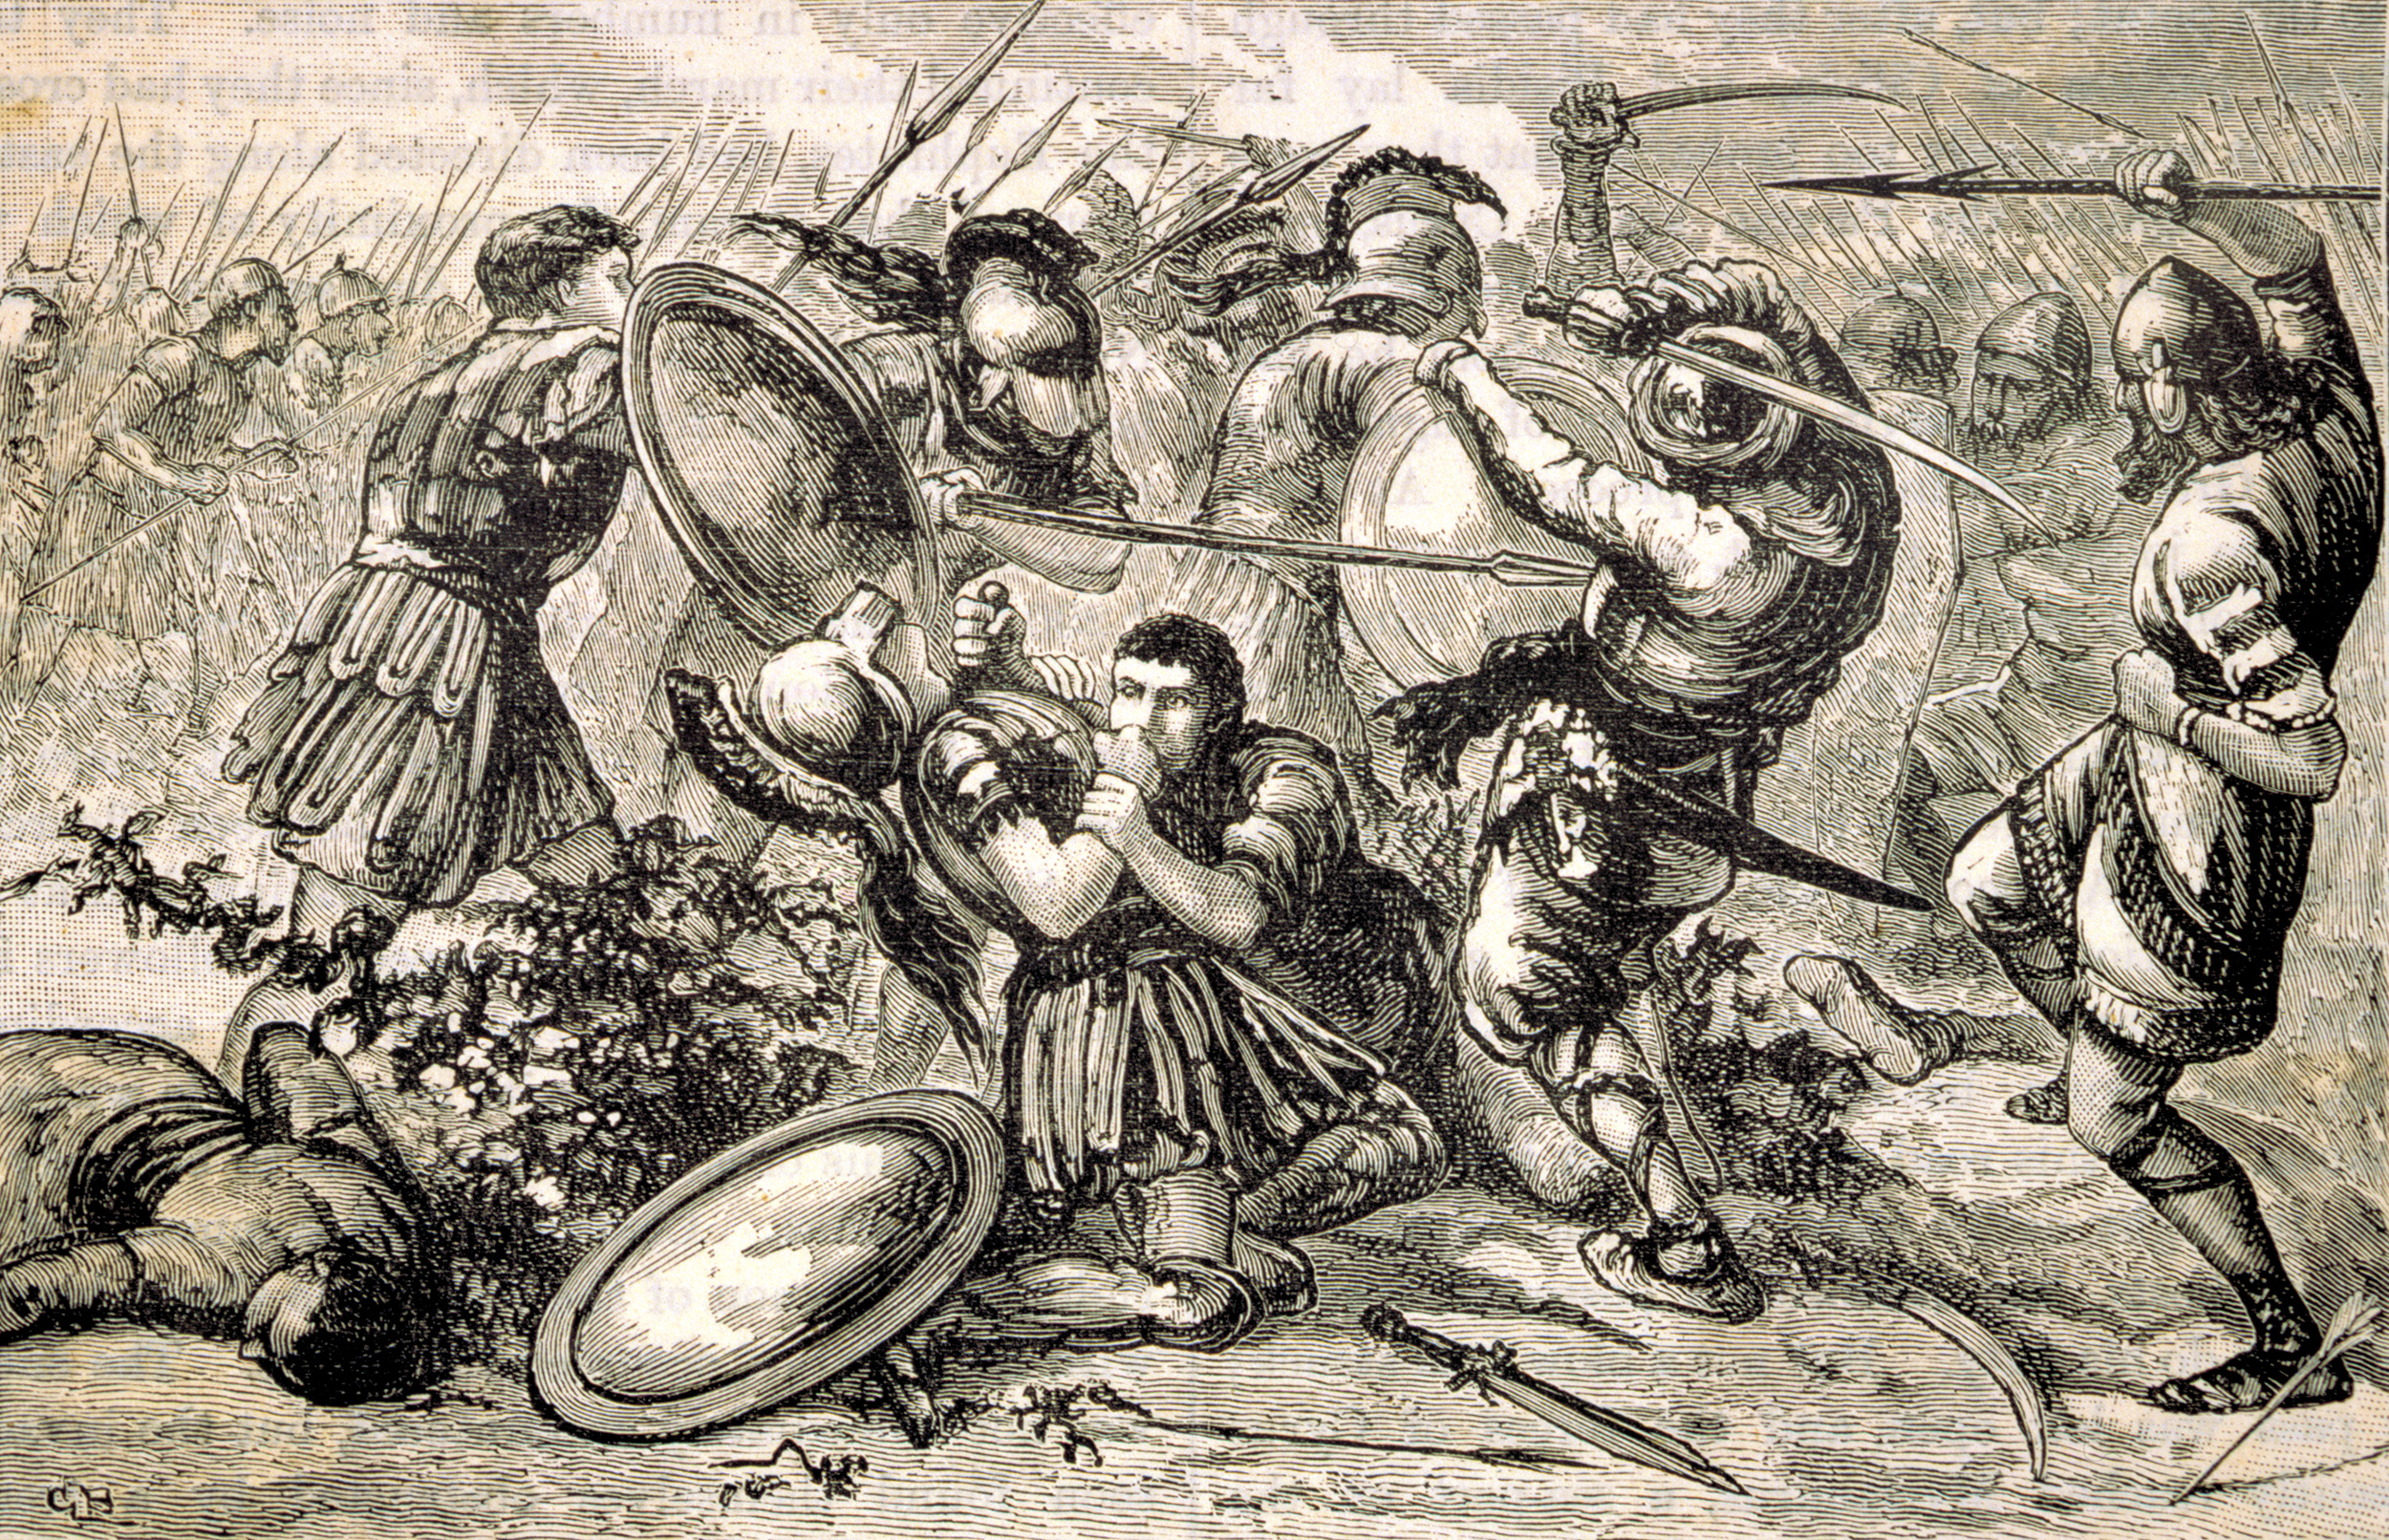 The Greeks, bearing hoplons and iron-tipped spears, take on the Persian army at Cunaxa.